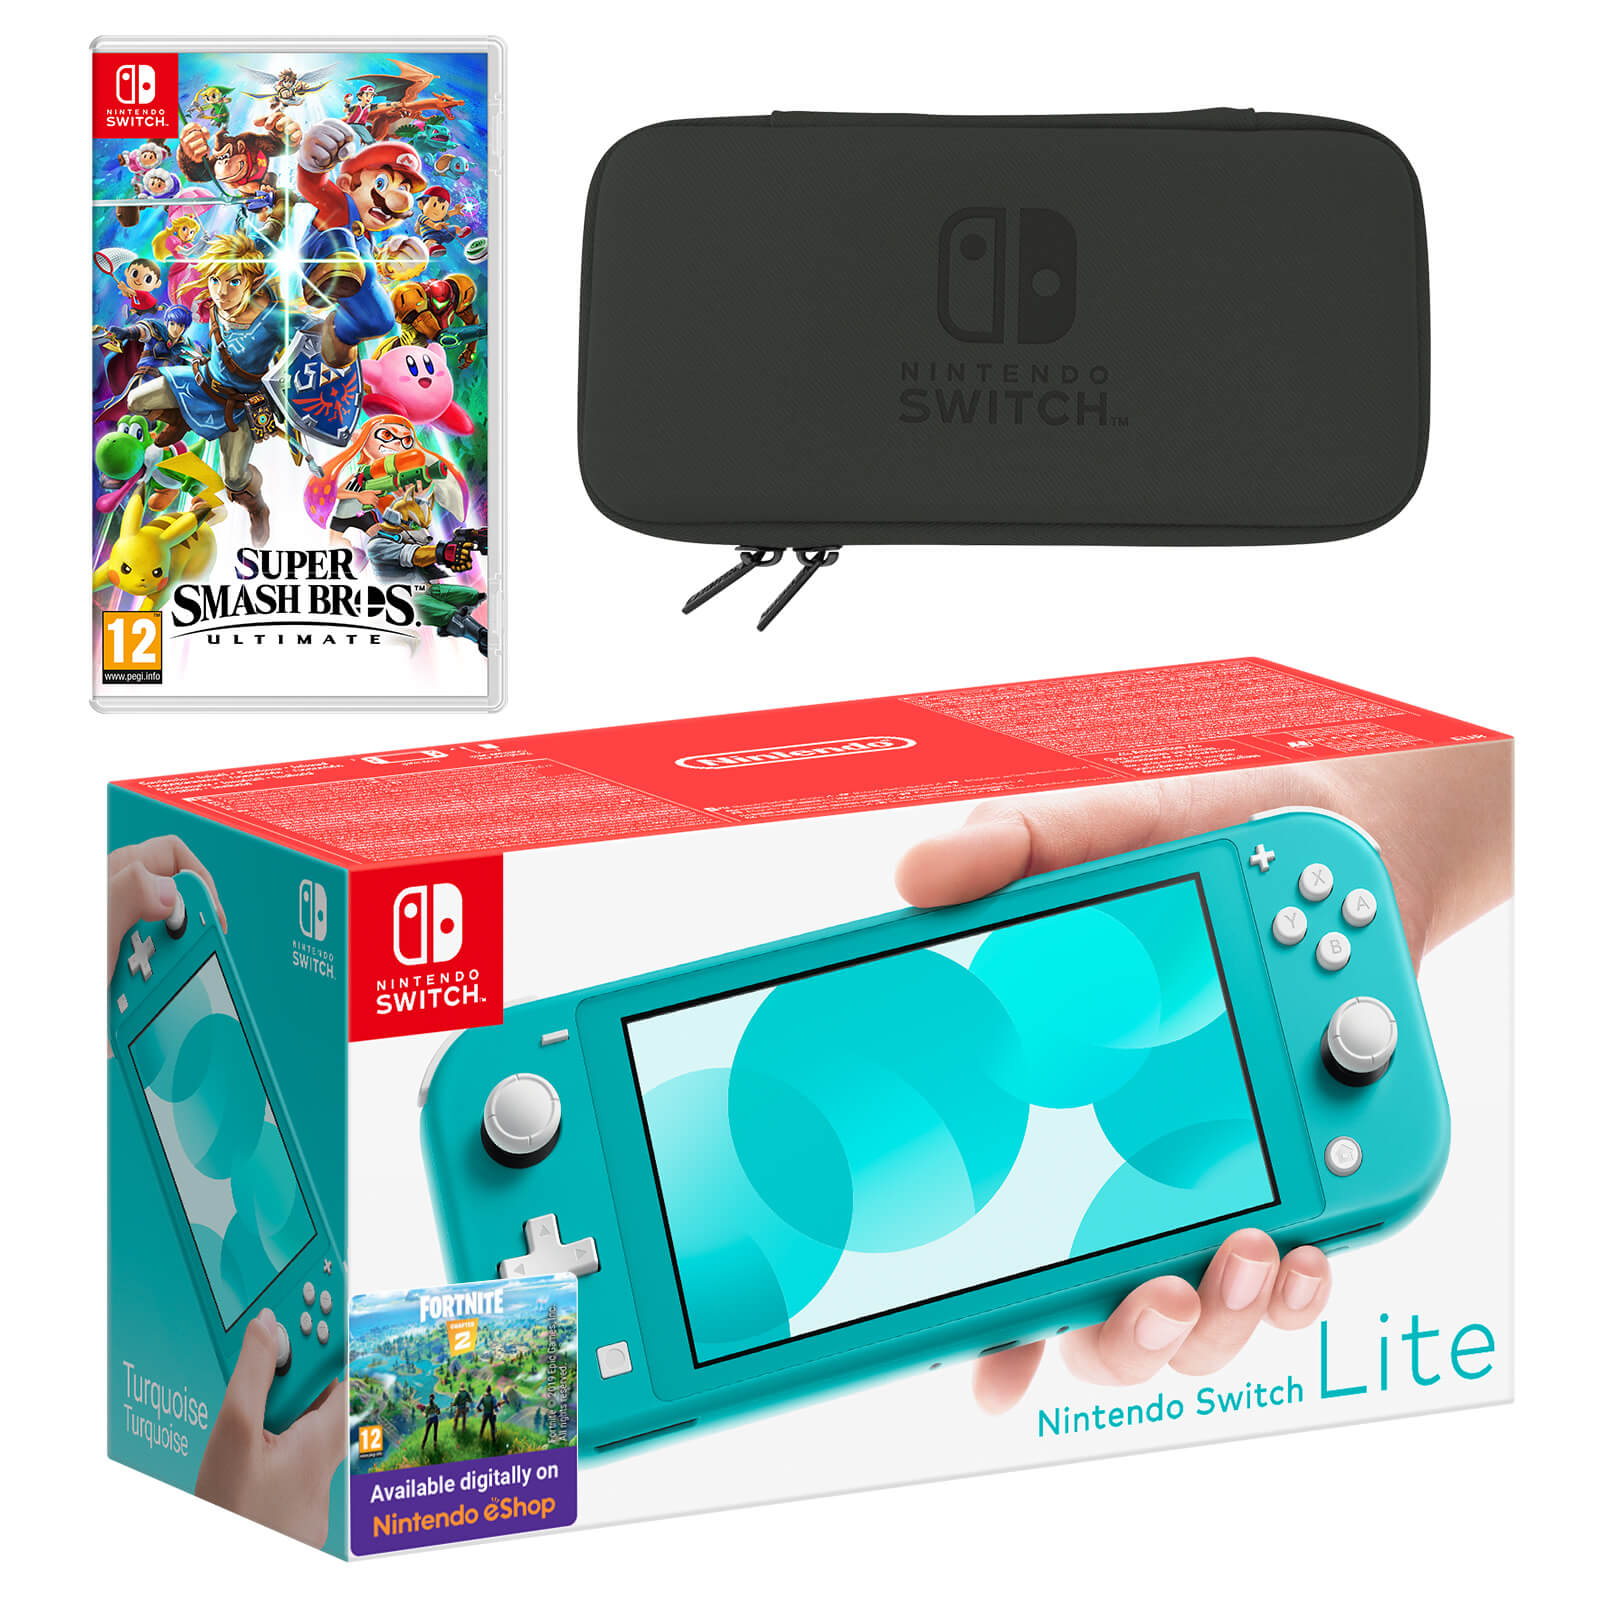 can you use a switch lite as a controller for smash